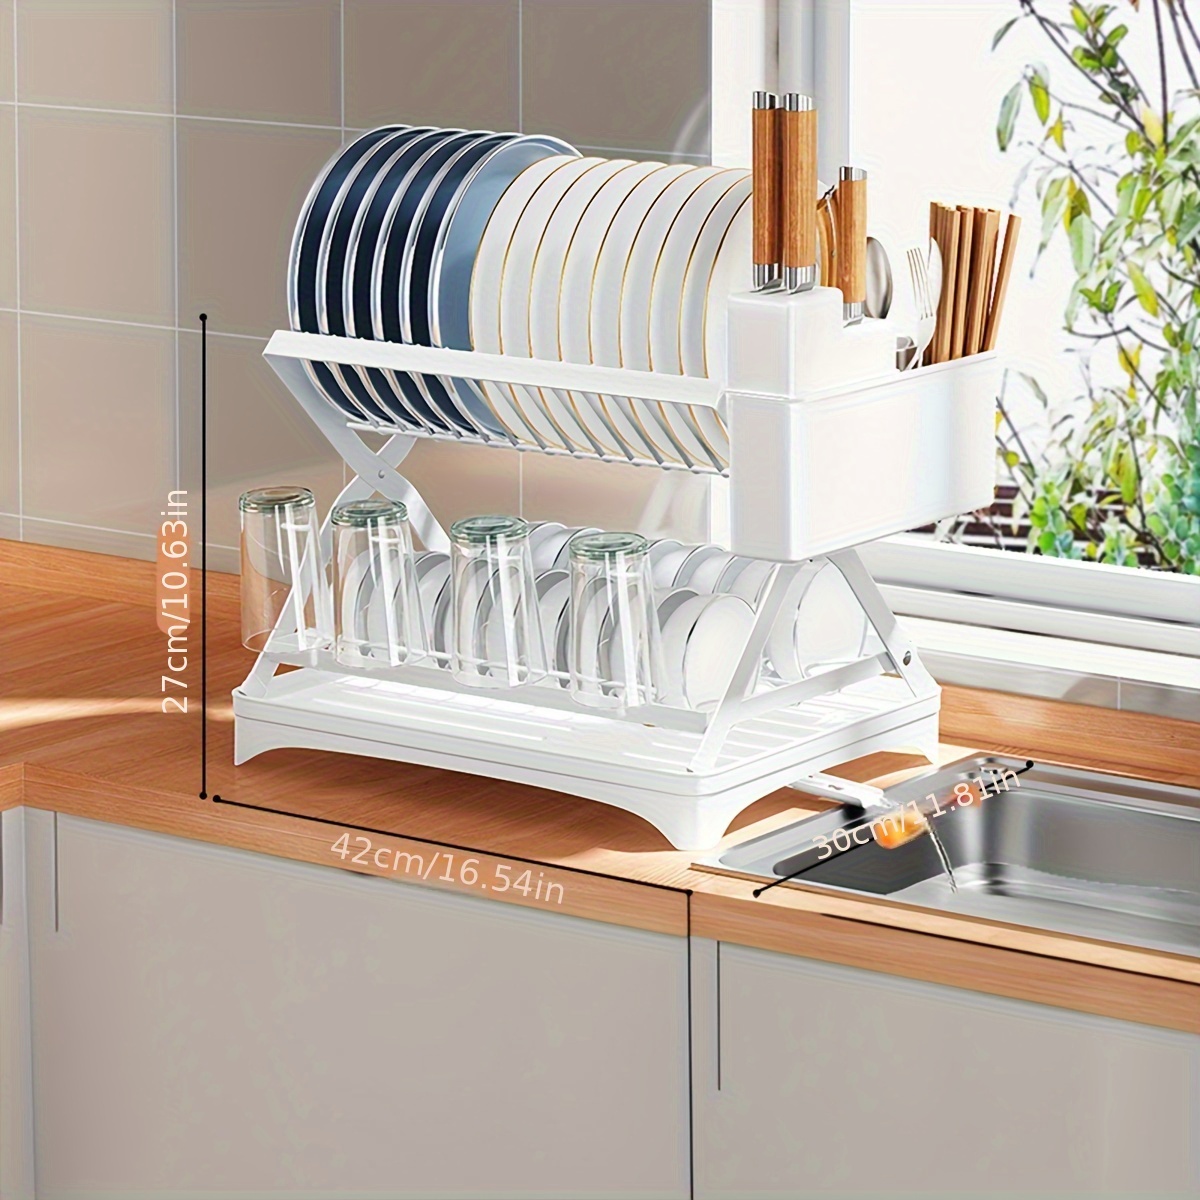 Two-Tier Dish Drying Rack - Rust Proof Stainless Steel, Self